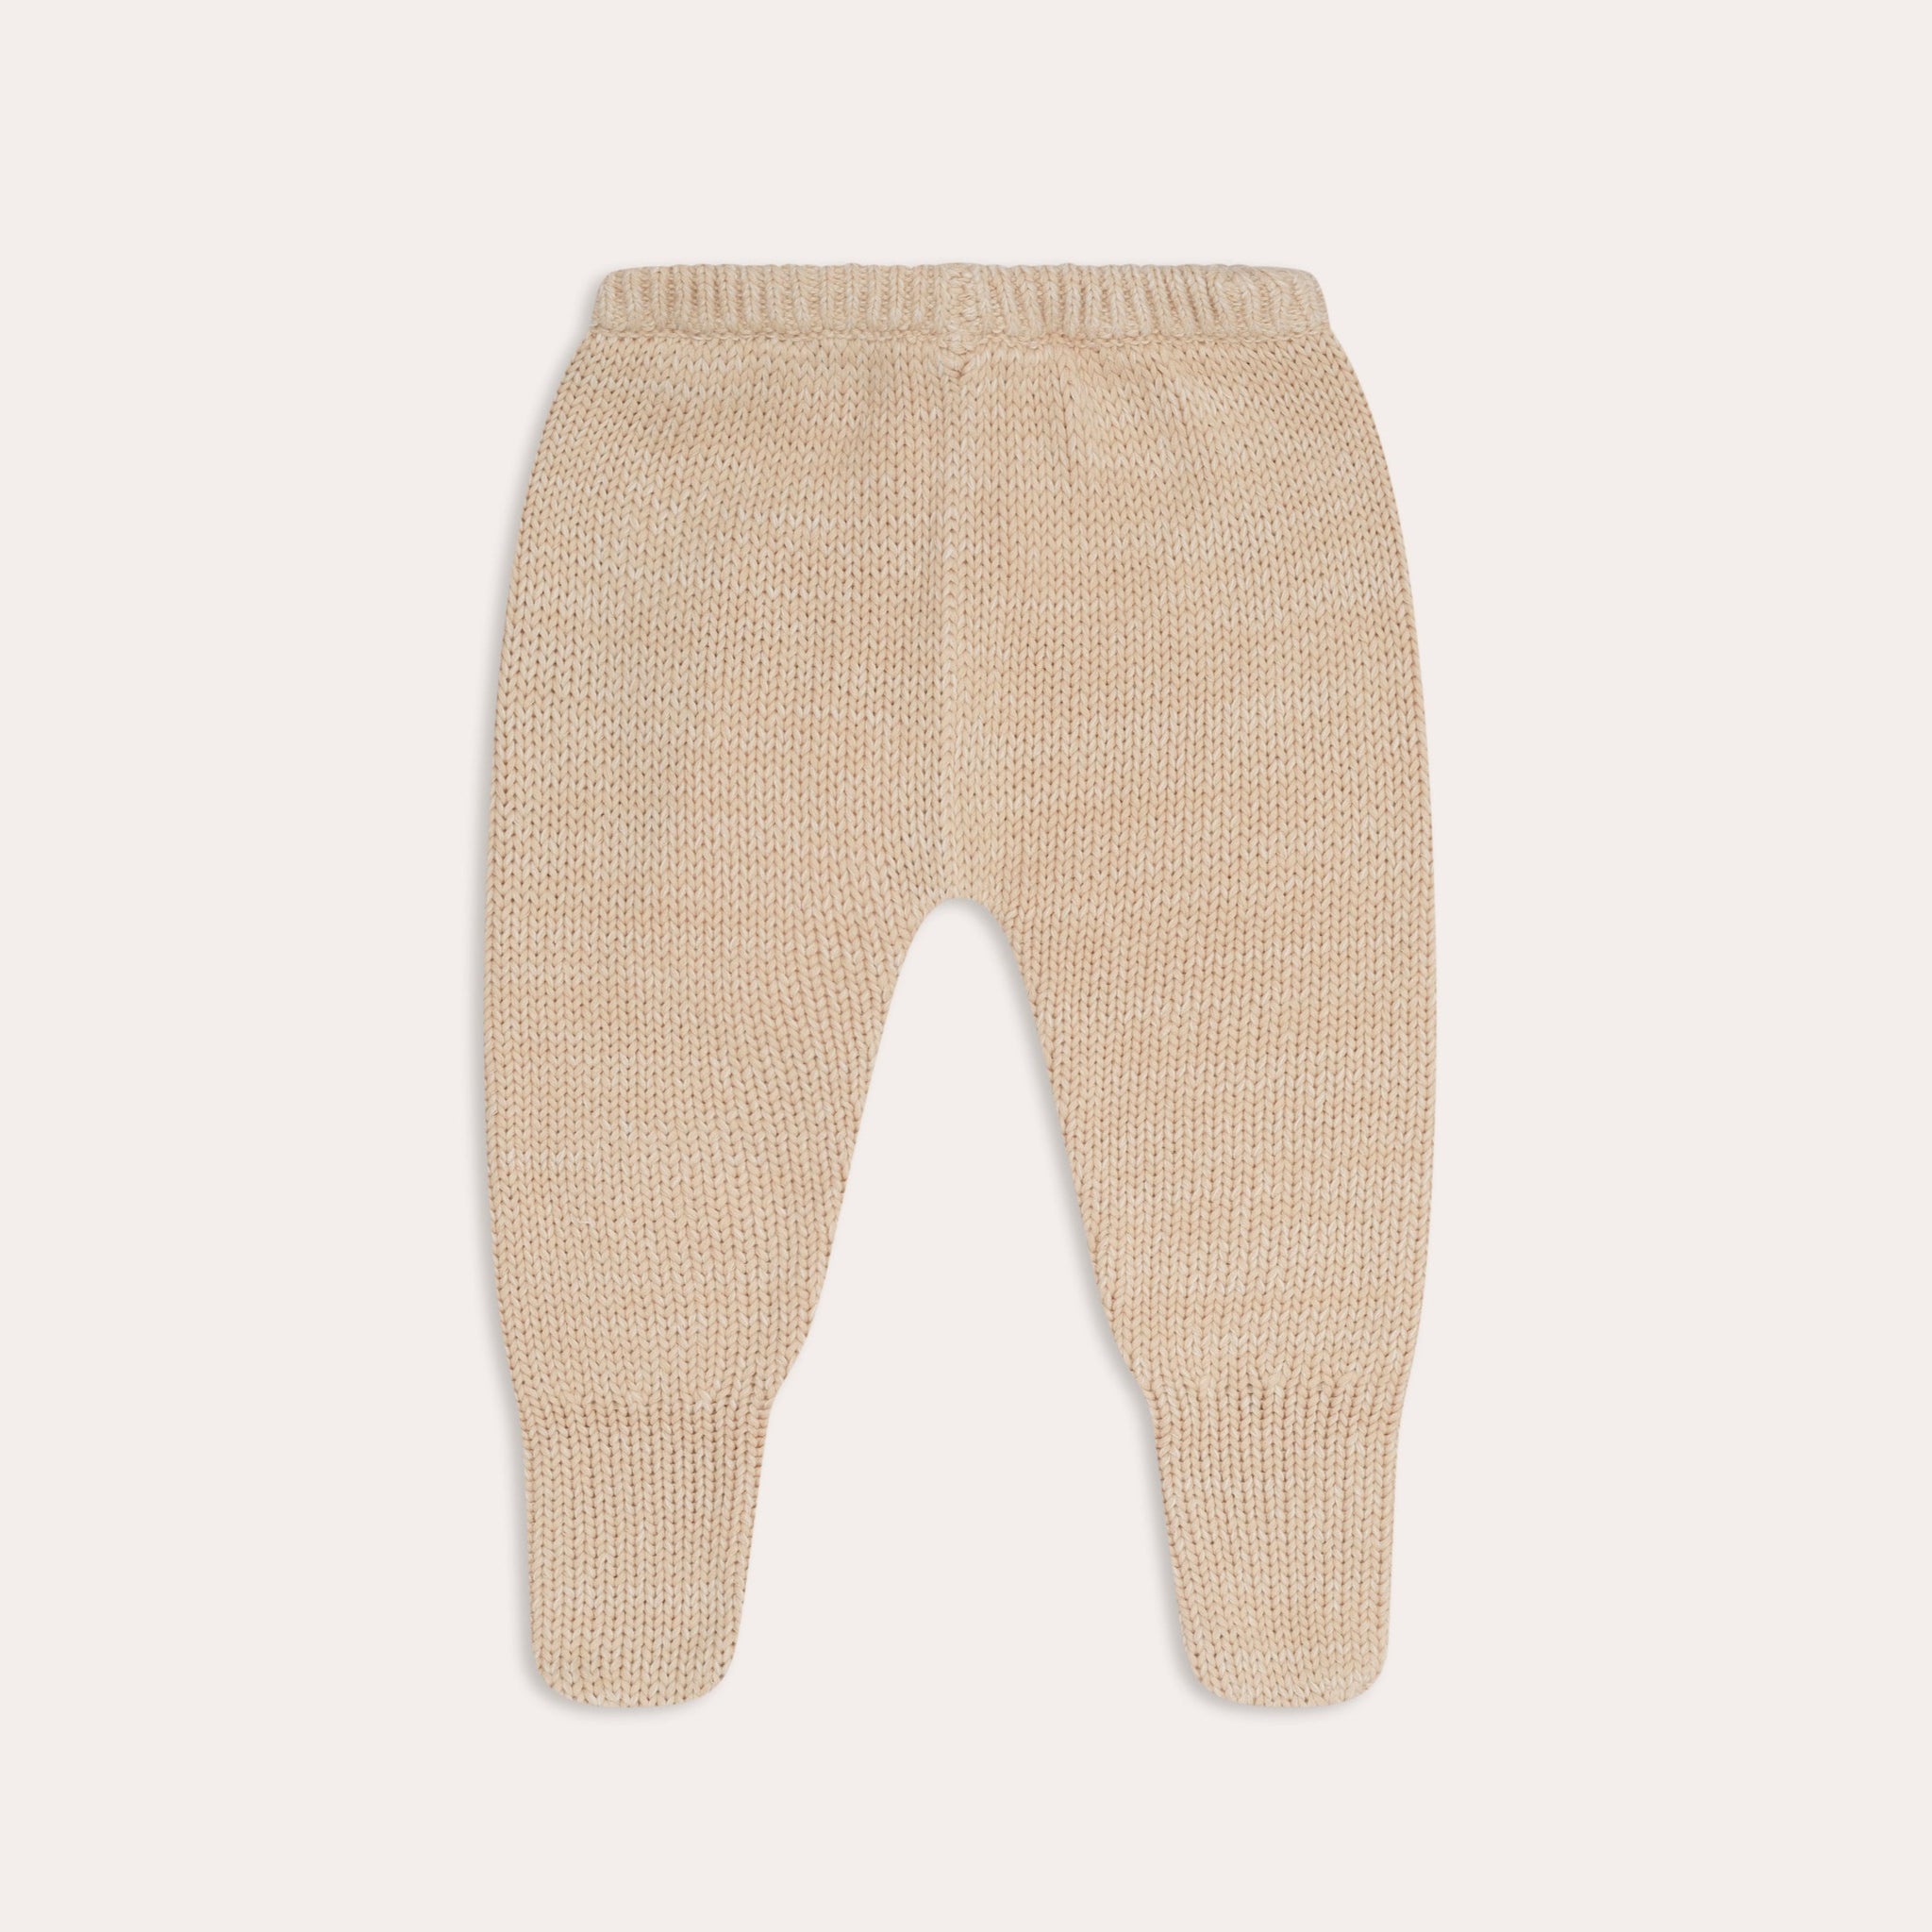 A baby's Illoura knit poet pants in sand on a white background.